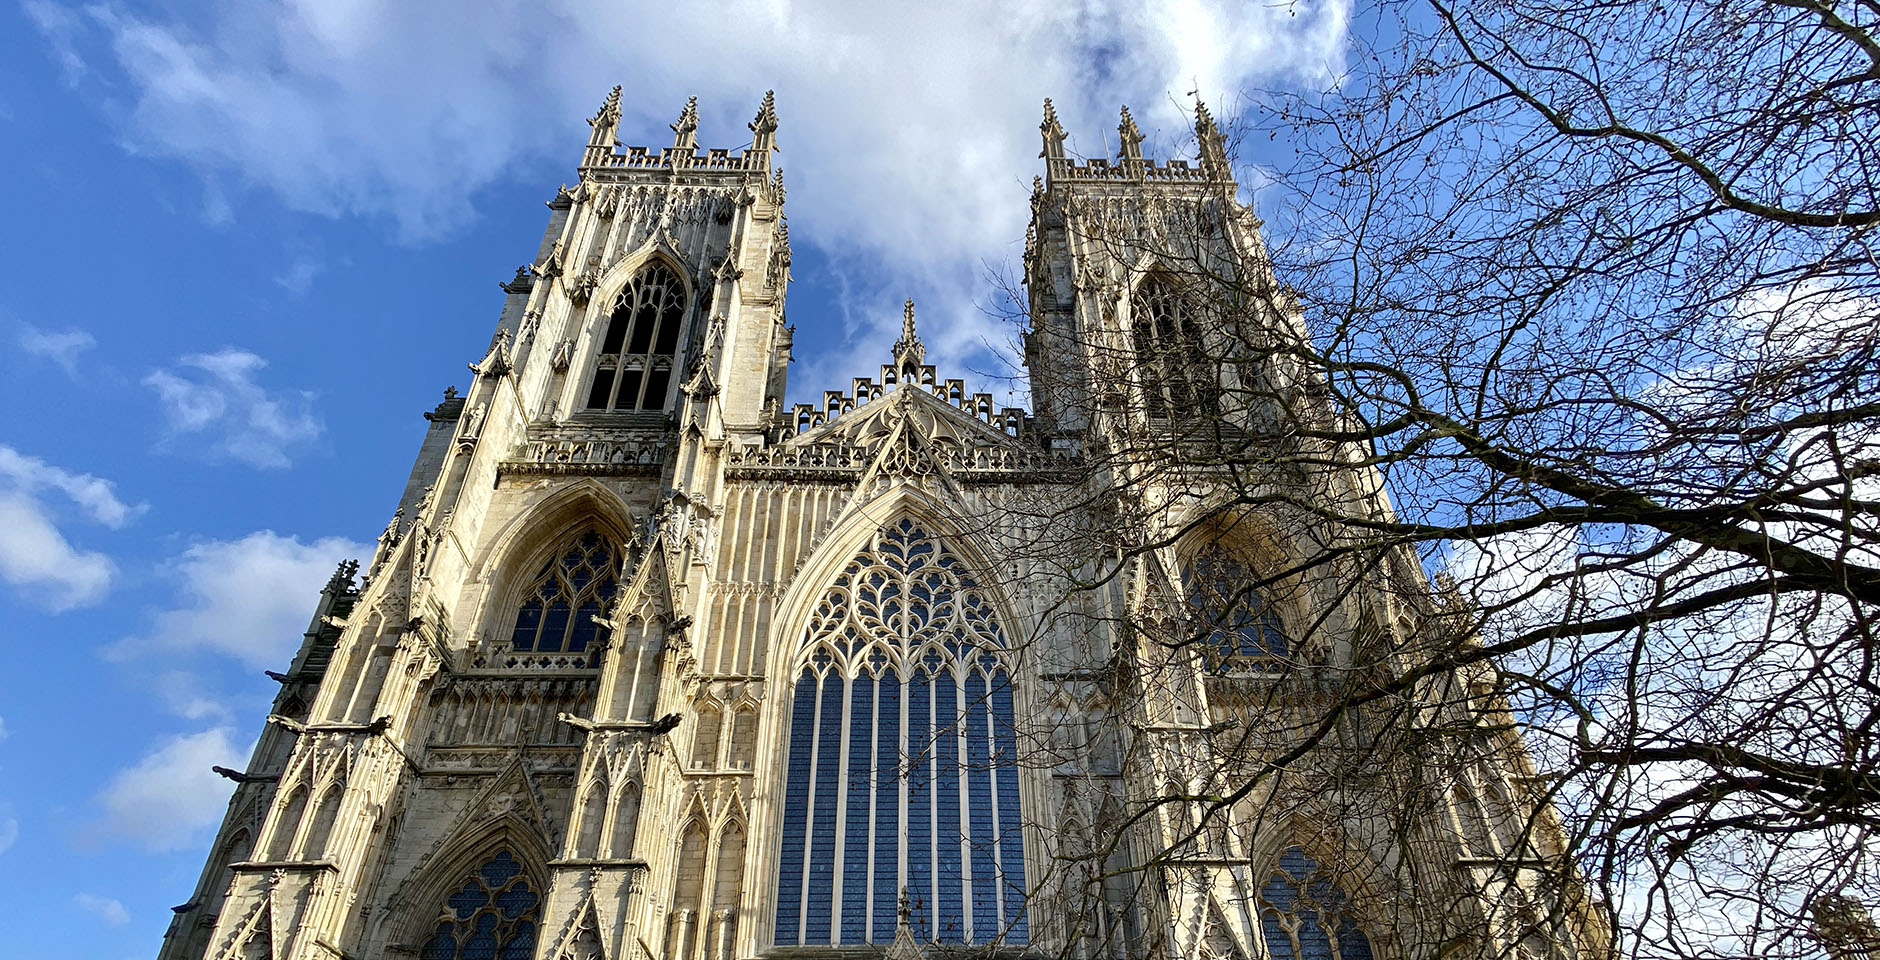 The famous Gothic cathedral York Minster